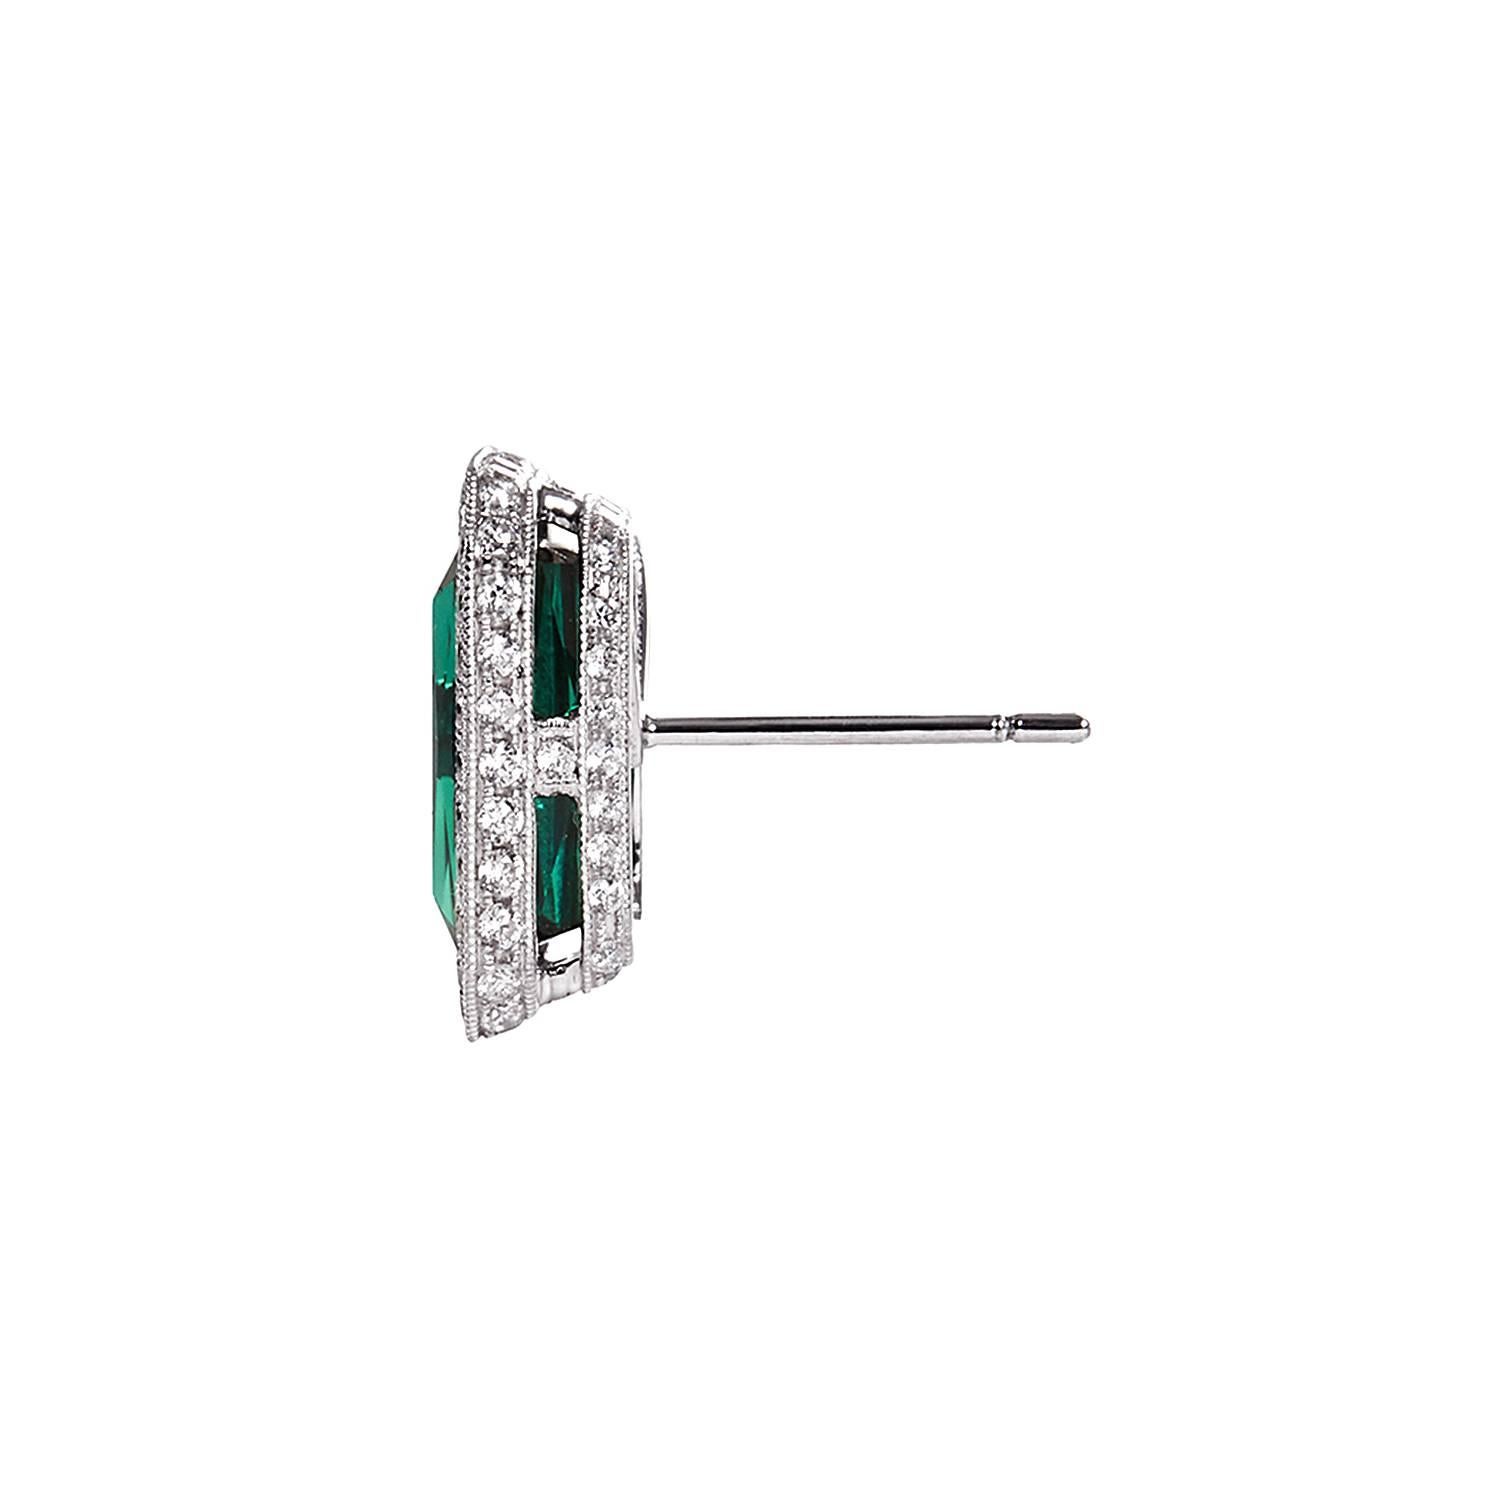 Elegant rectangular mixed cut transparant deep bluish chrome green tourmalines of fine color quality. Hand made and one of a kind earrings with 184 white brilliant cut diamonds in milgrain setting. Matching ring is available.  

Gemstone